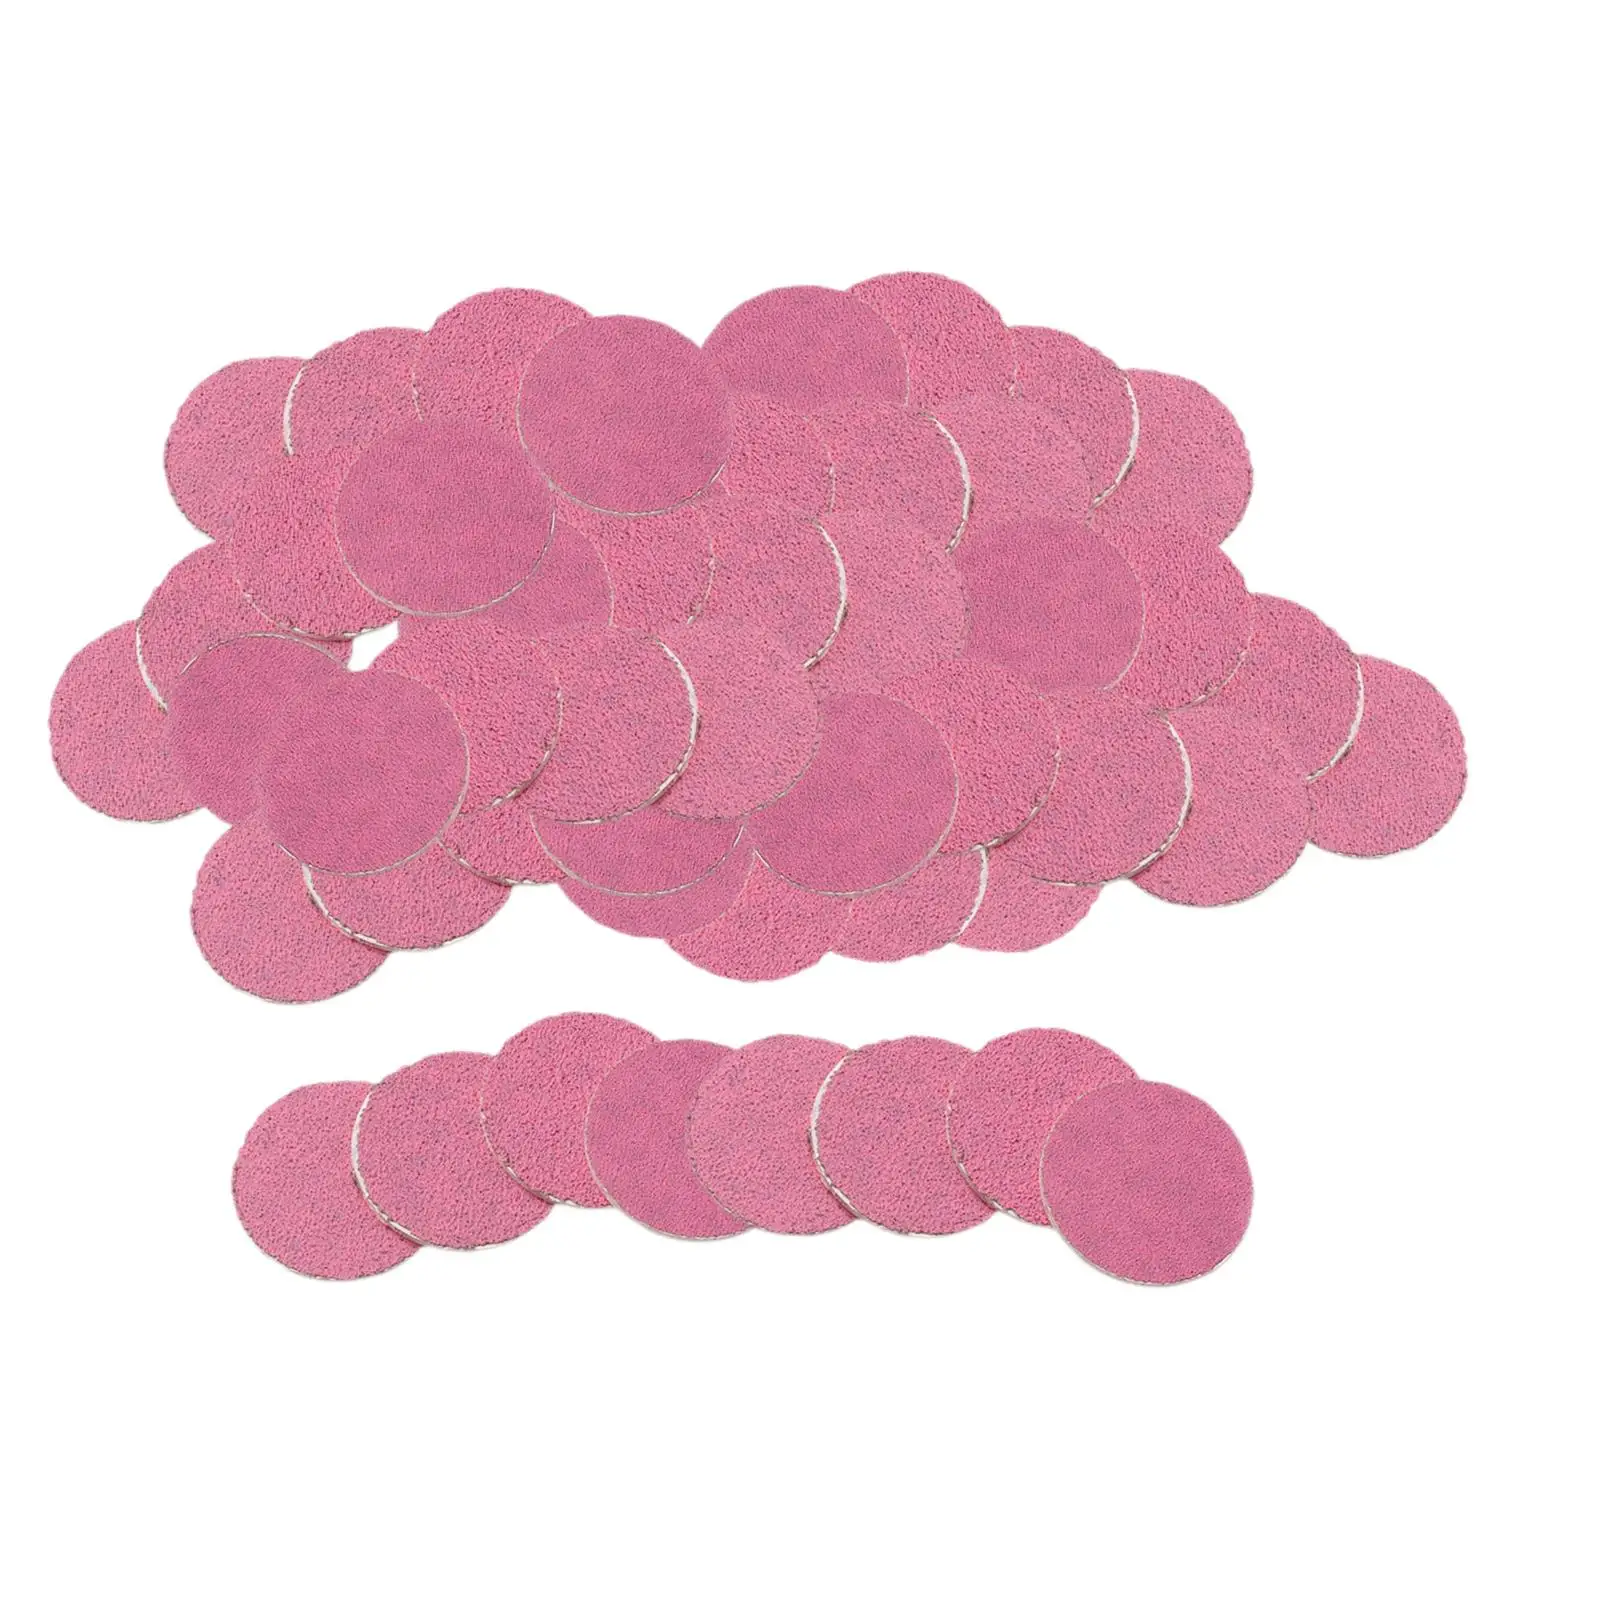 50x Sandpaper Disk Replacement Pad Pink Sandpaper Pad disks Replaceable for Dead Cracked Hard Skin Polishing Craft Women Men